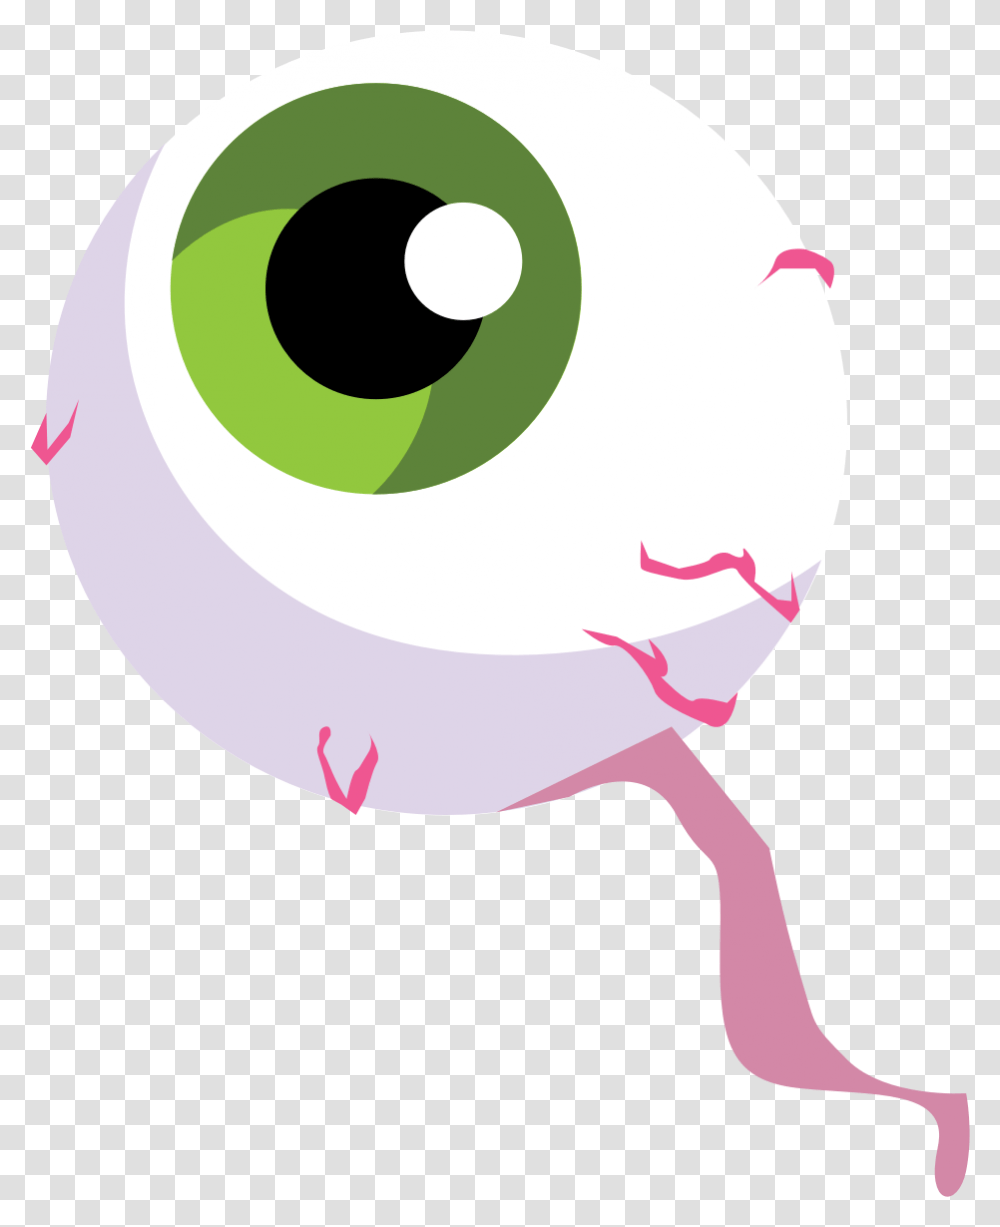 Spooky Eyeball Vector Clipart Image, Apparel, Sweets, Food Transparent Png